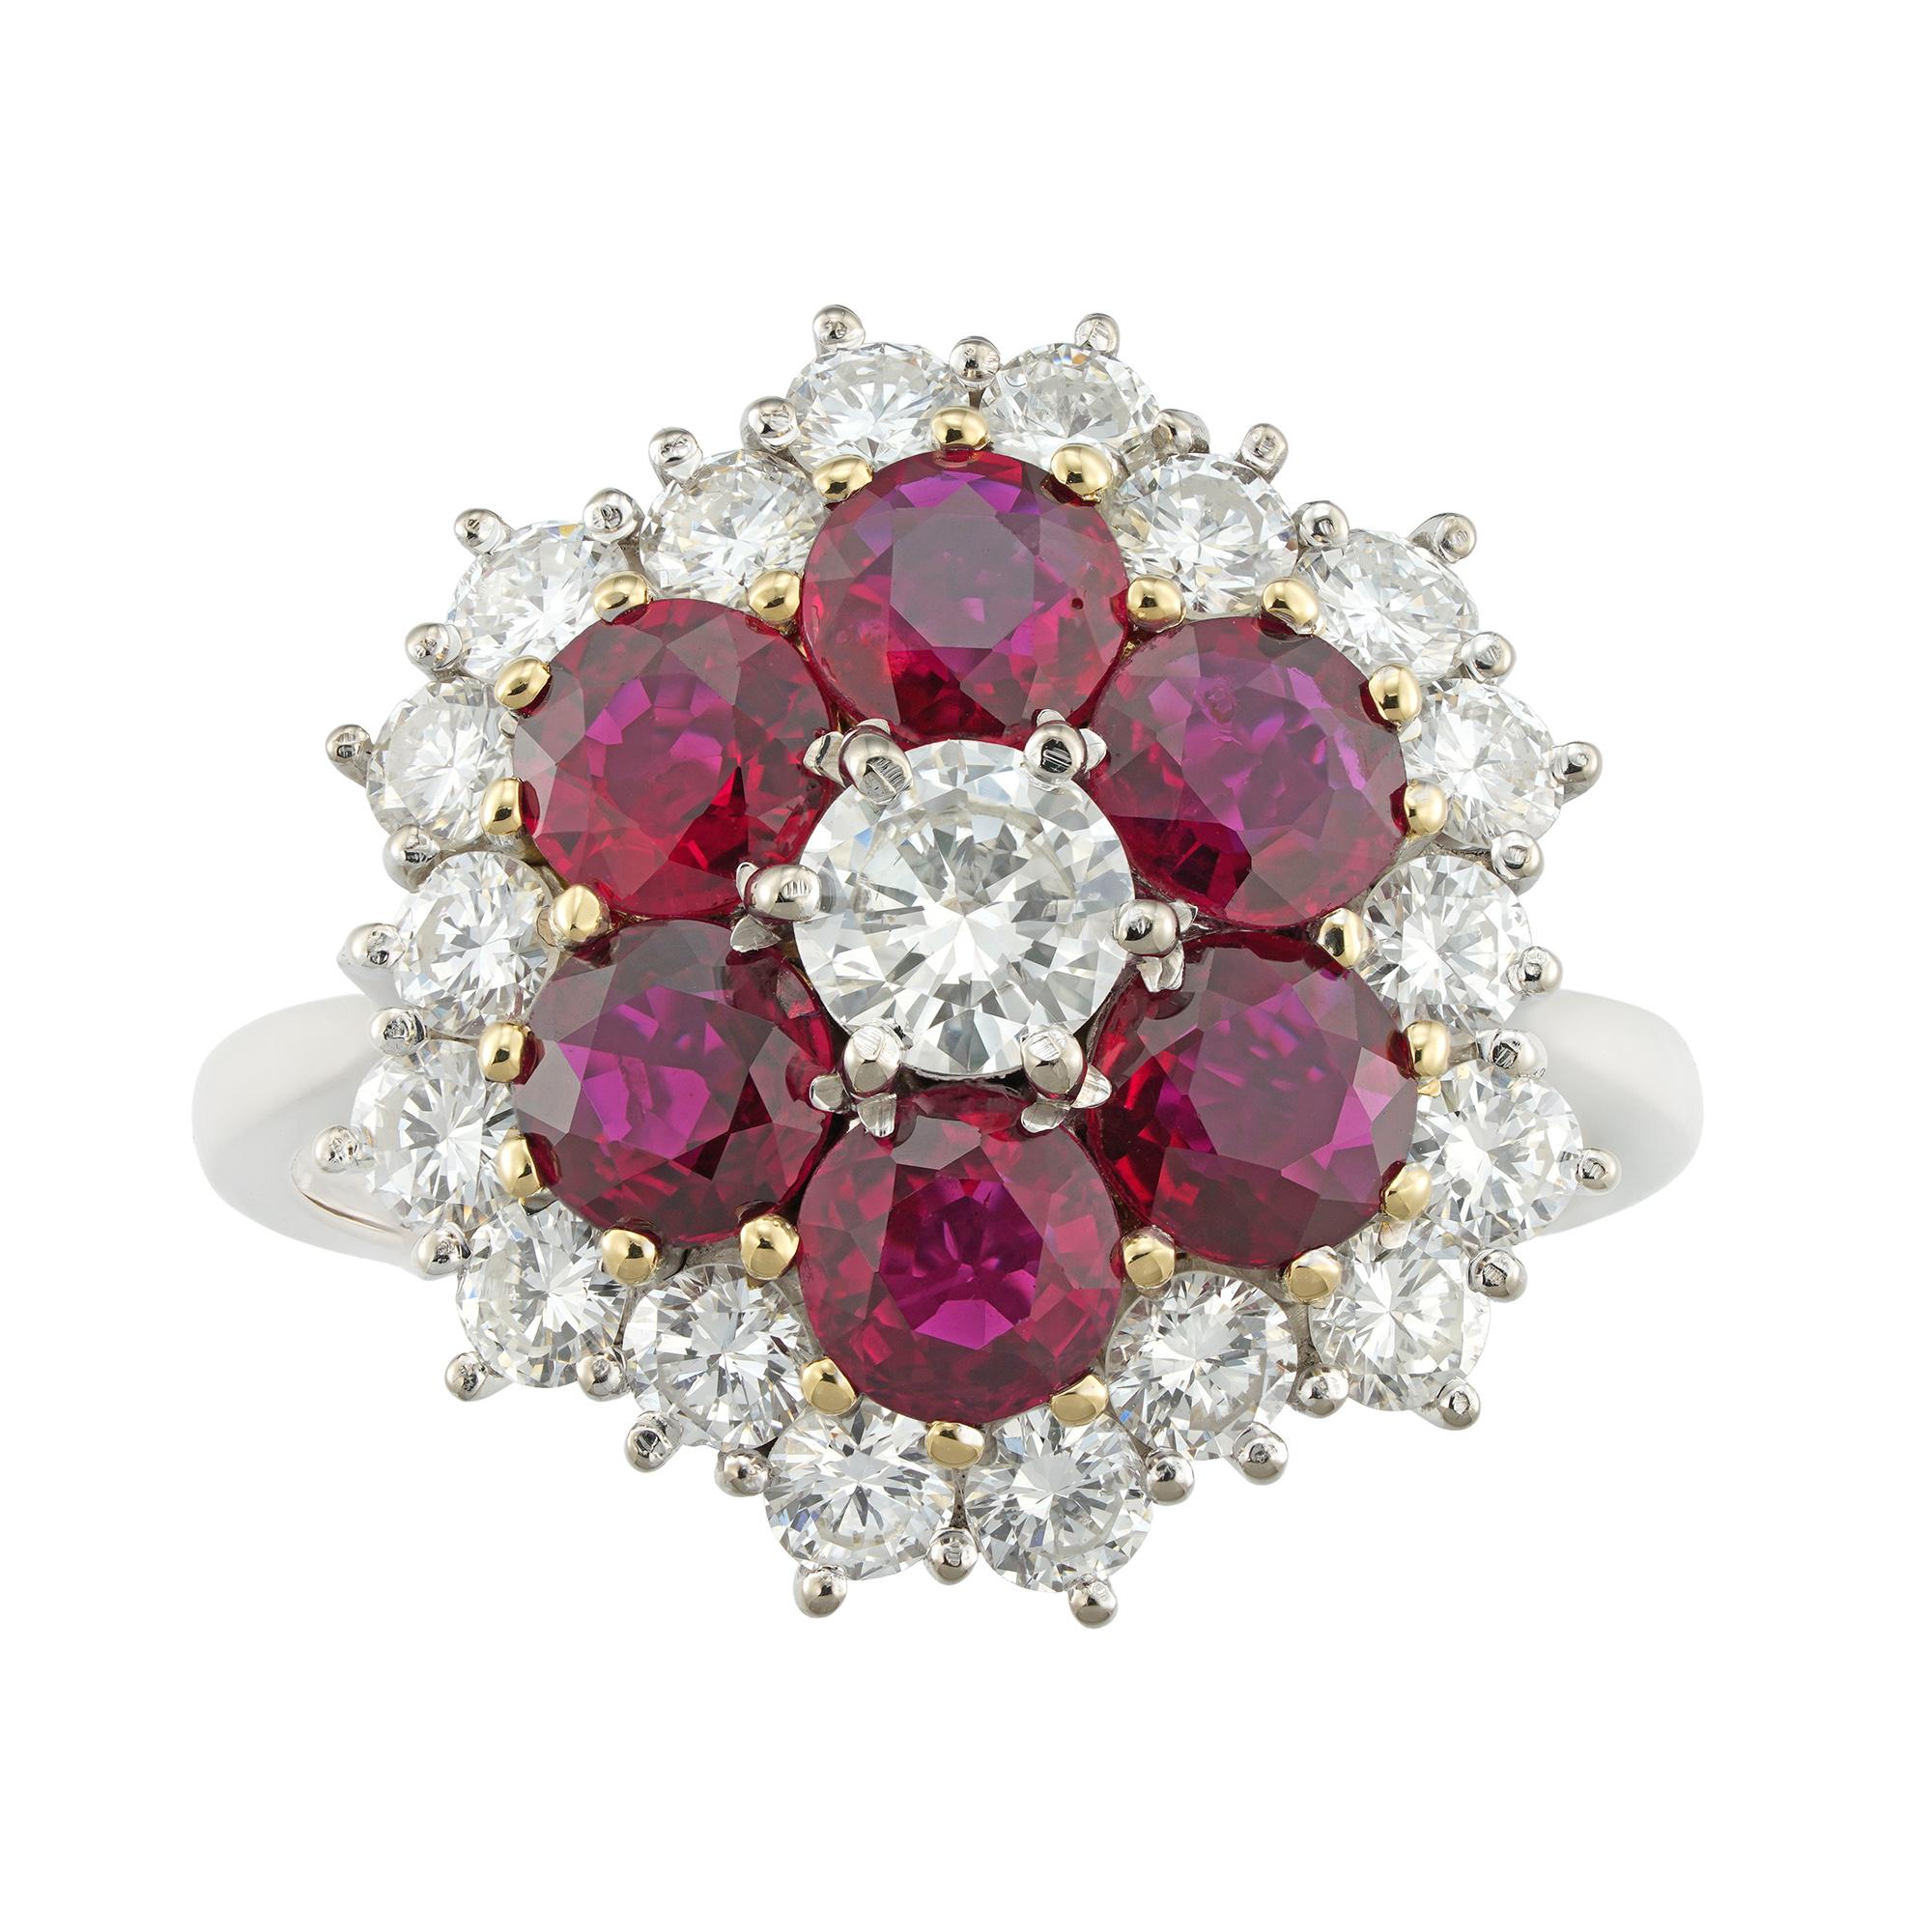 A ruby and diamond cluster ring, to the centre a round brilliant-cut diamond estimated to weigh 0.4 carats, surrounded by six round faceted rubies estimated to weigh 2.75 carats in total, accompanied by GCS Report stating to be of Thai origin with